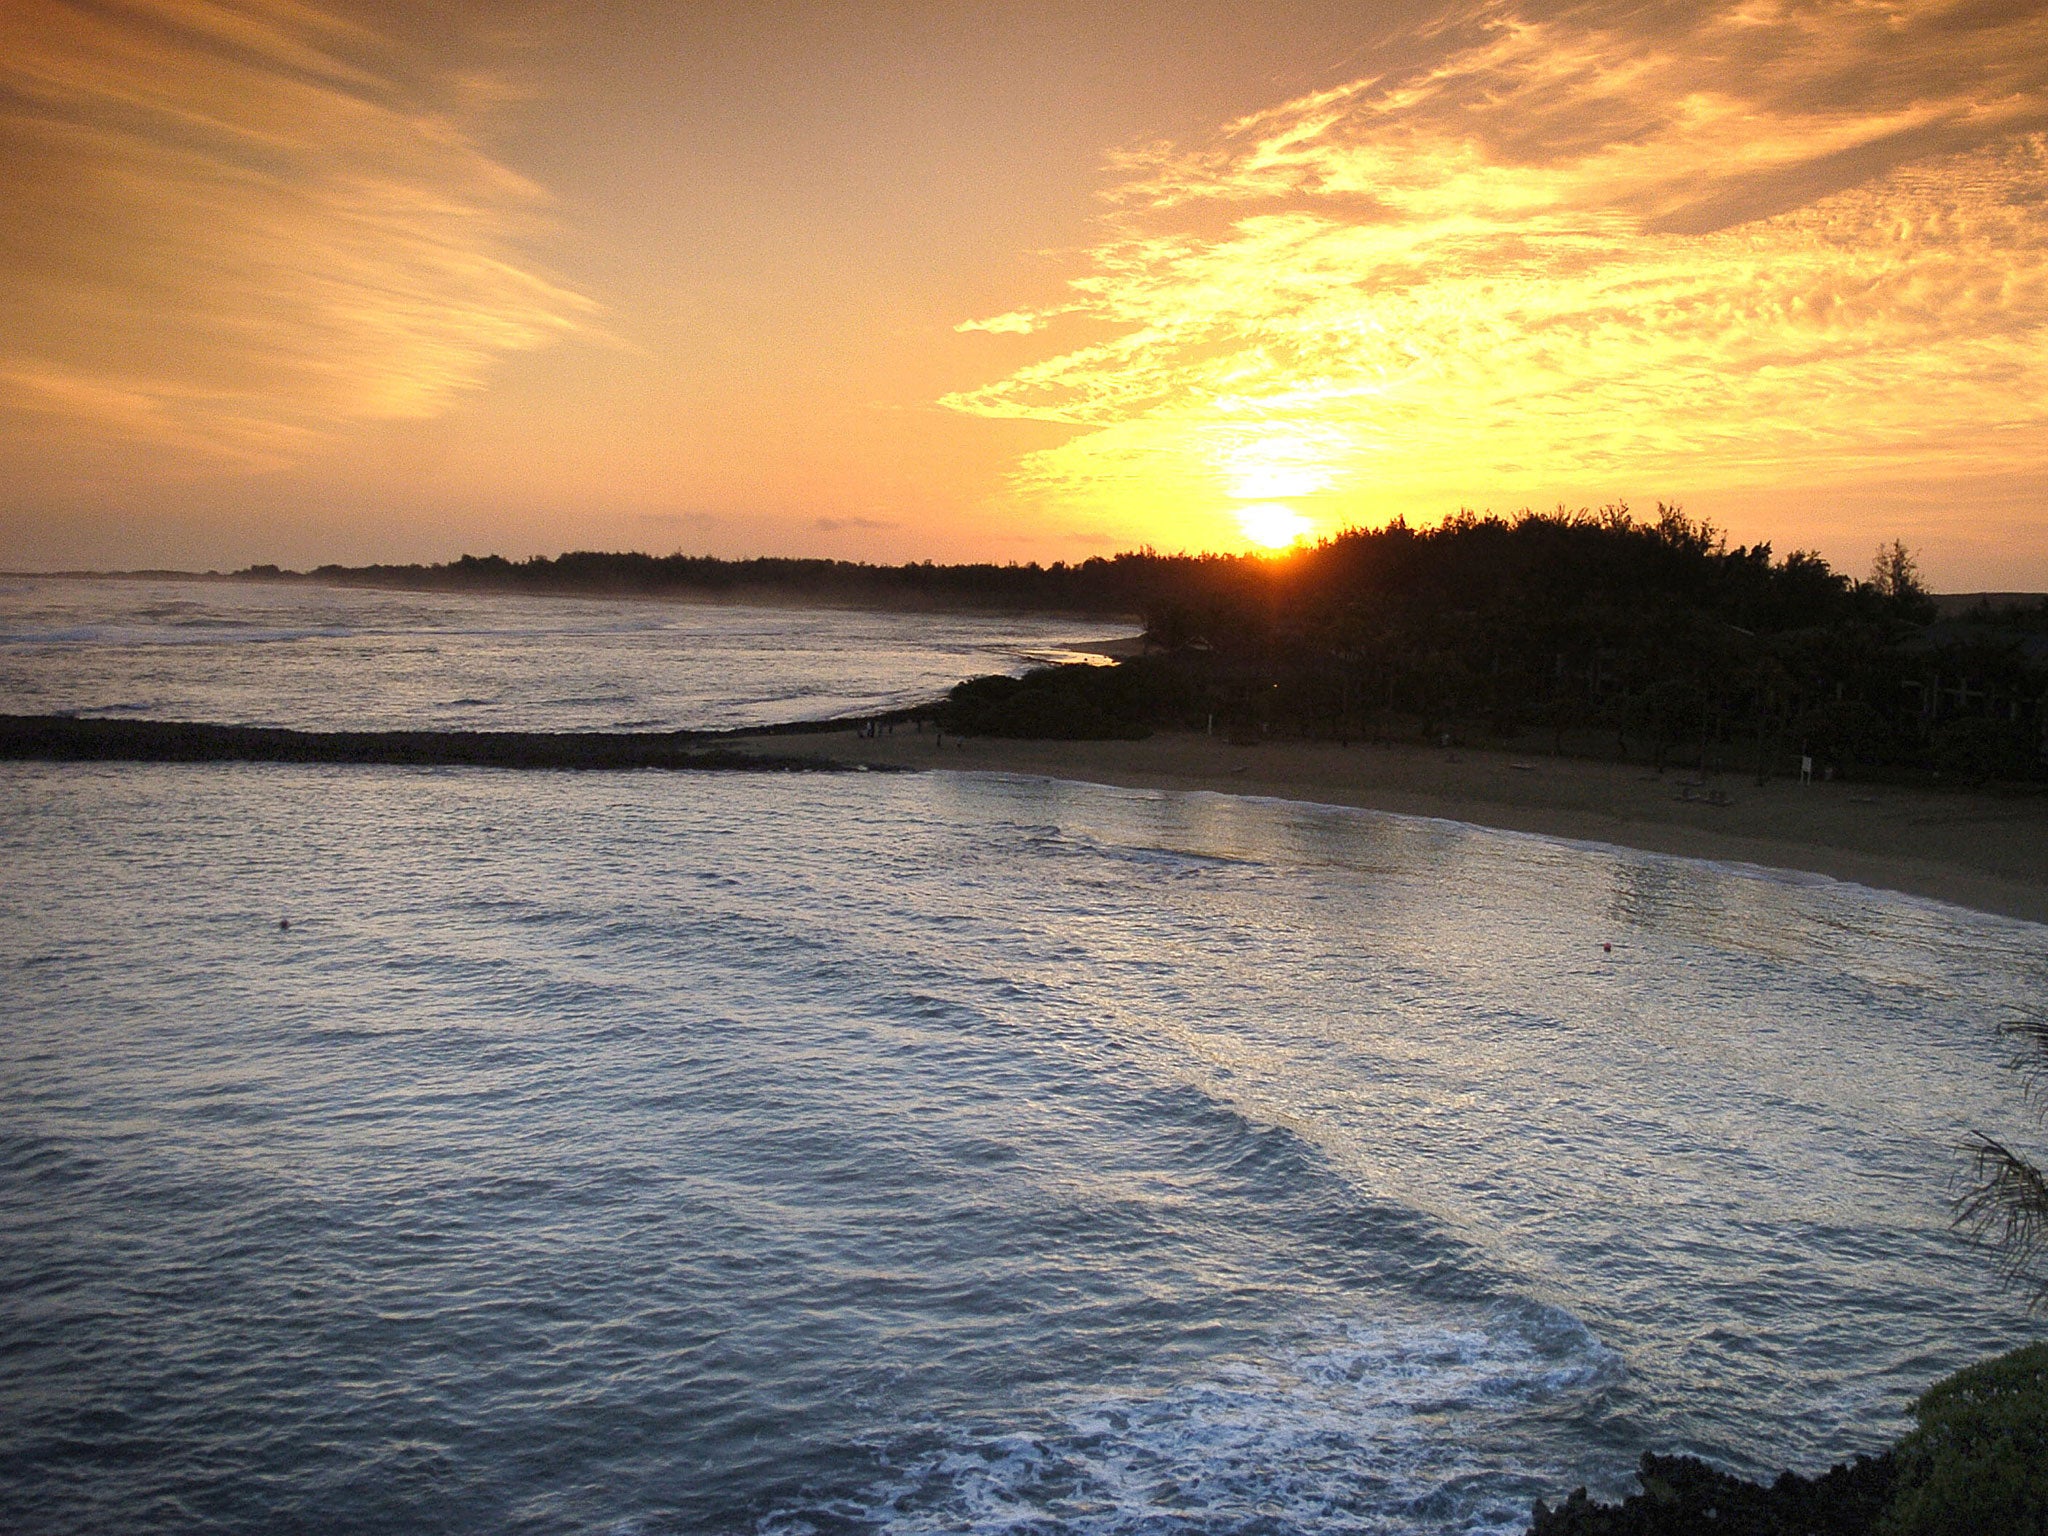 A sunrise over the Pacific Ocean at Turtle Bay